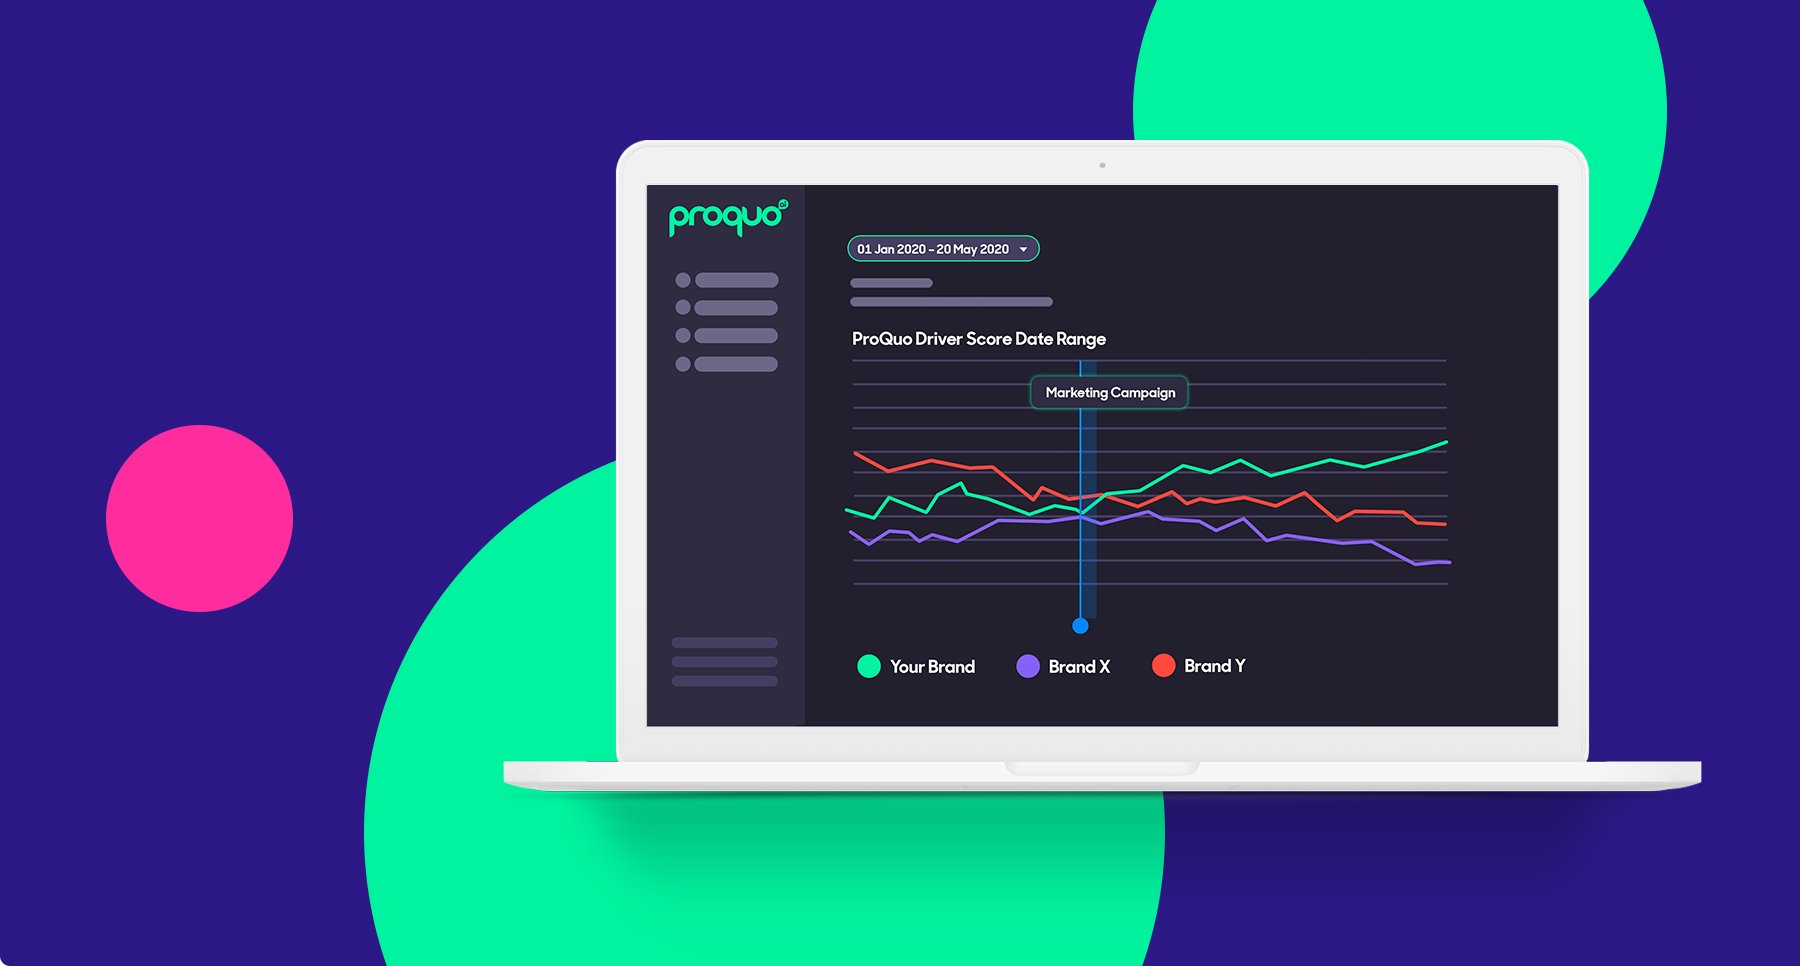 ProQuo AI's brand management platform using always-on data to show brand and competitor performance